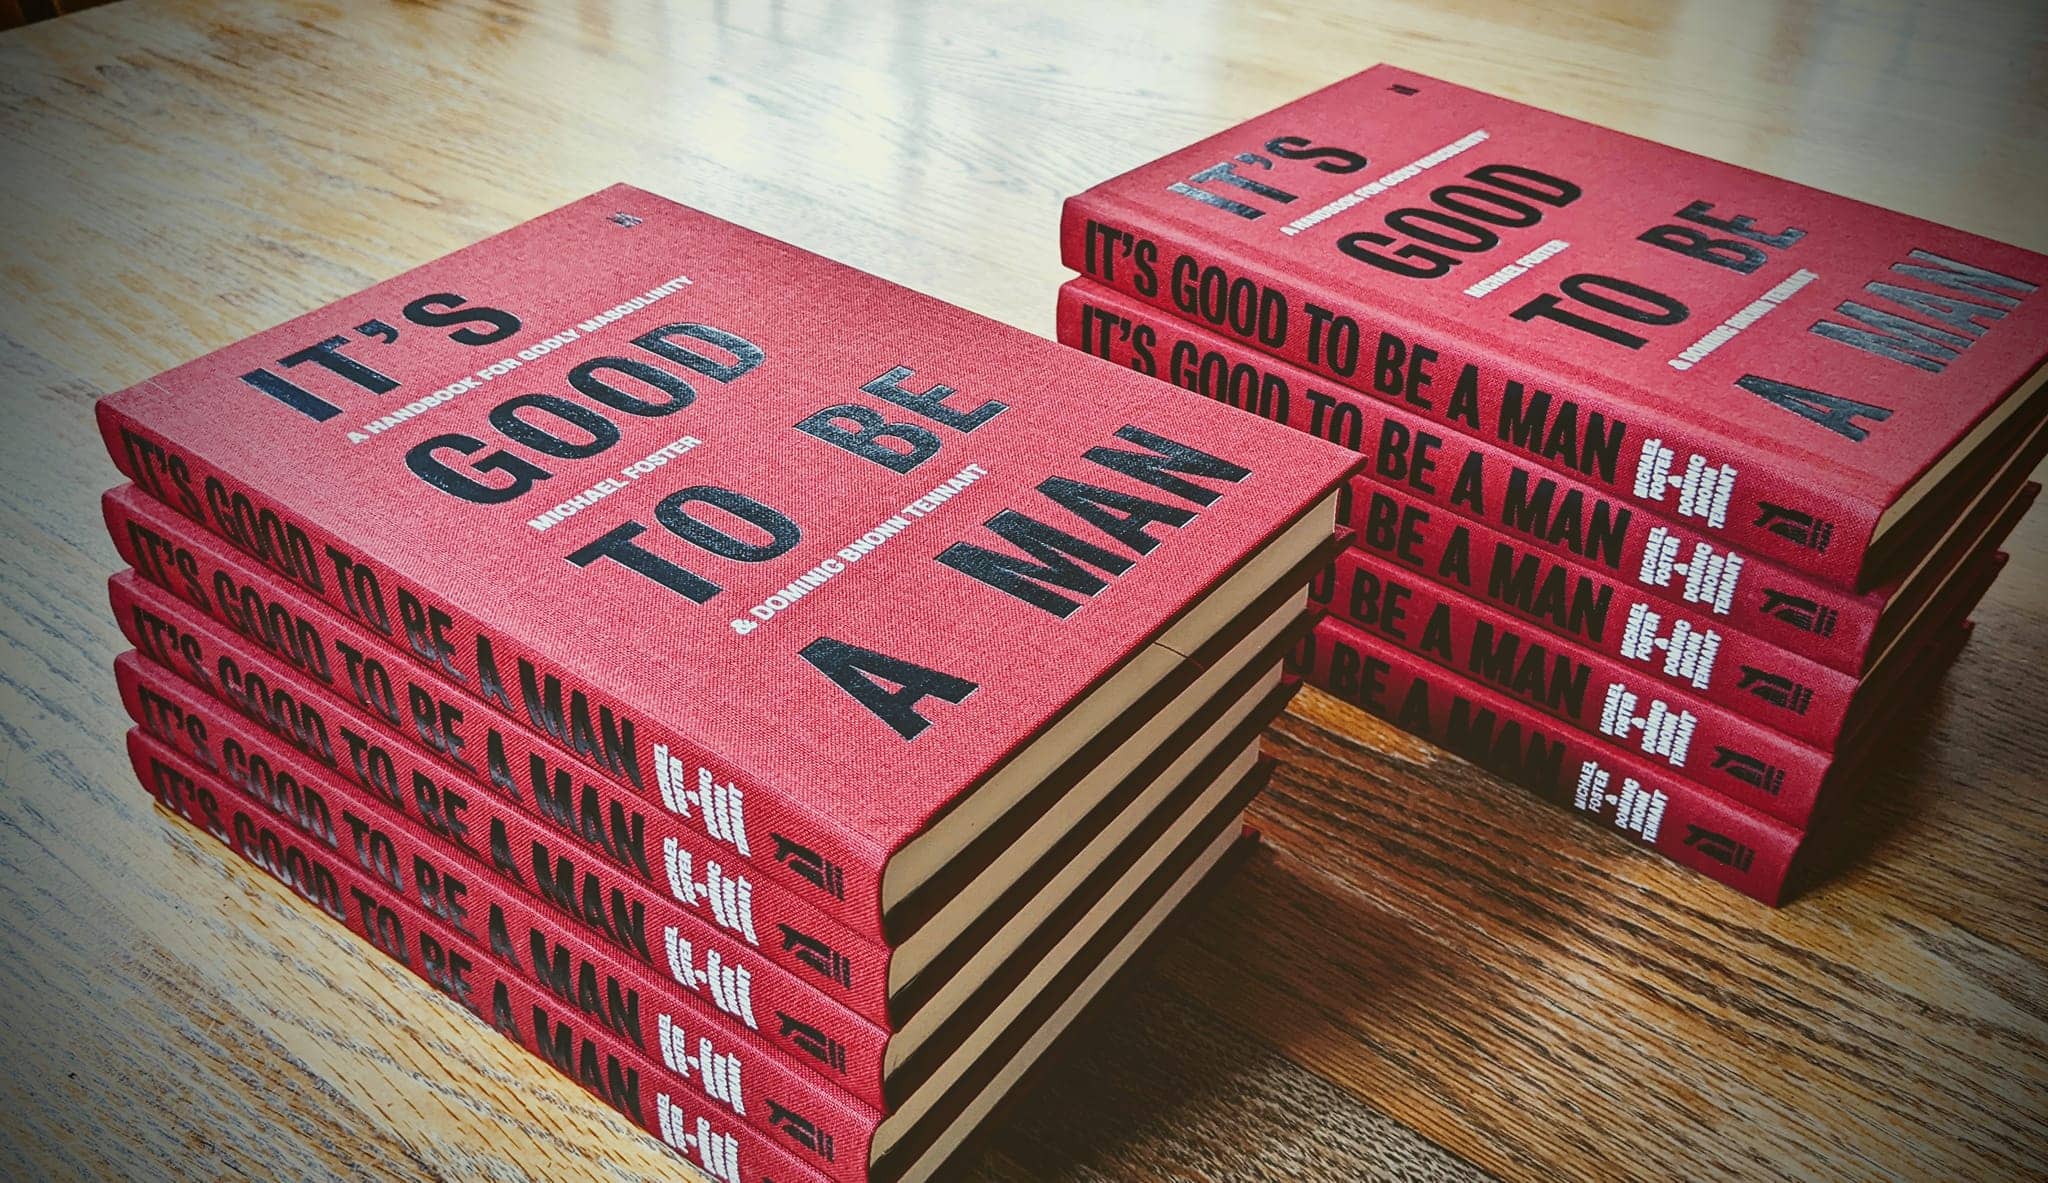 It's Good To Be A Man: A Handbook for Godly Masculinity